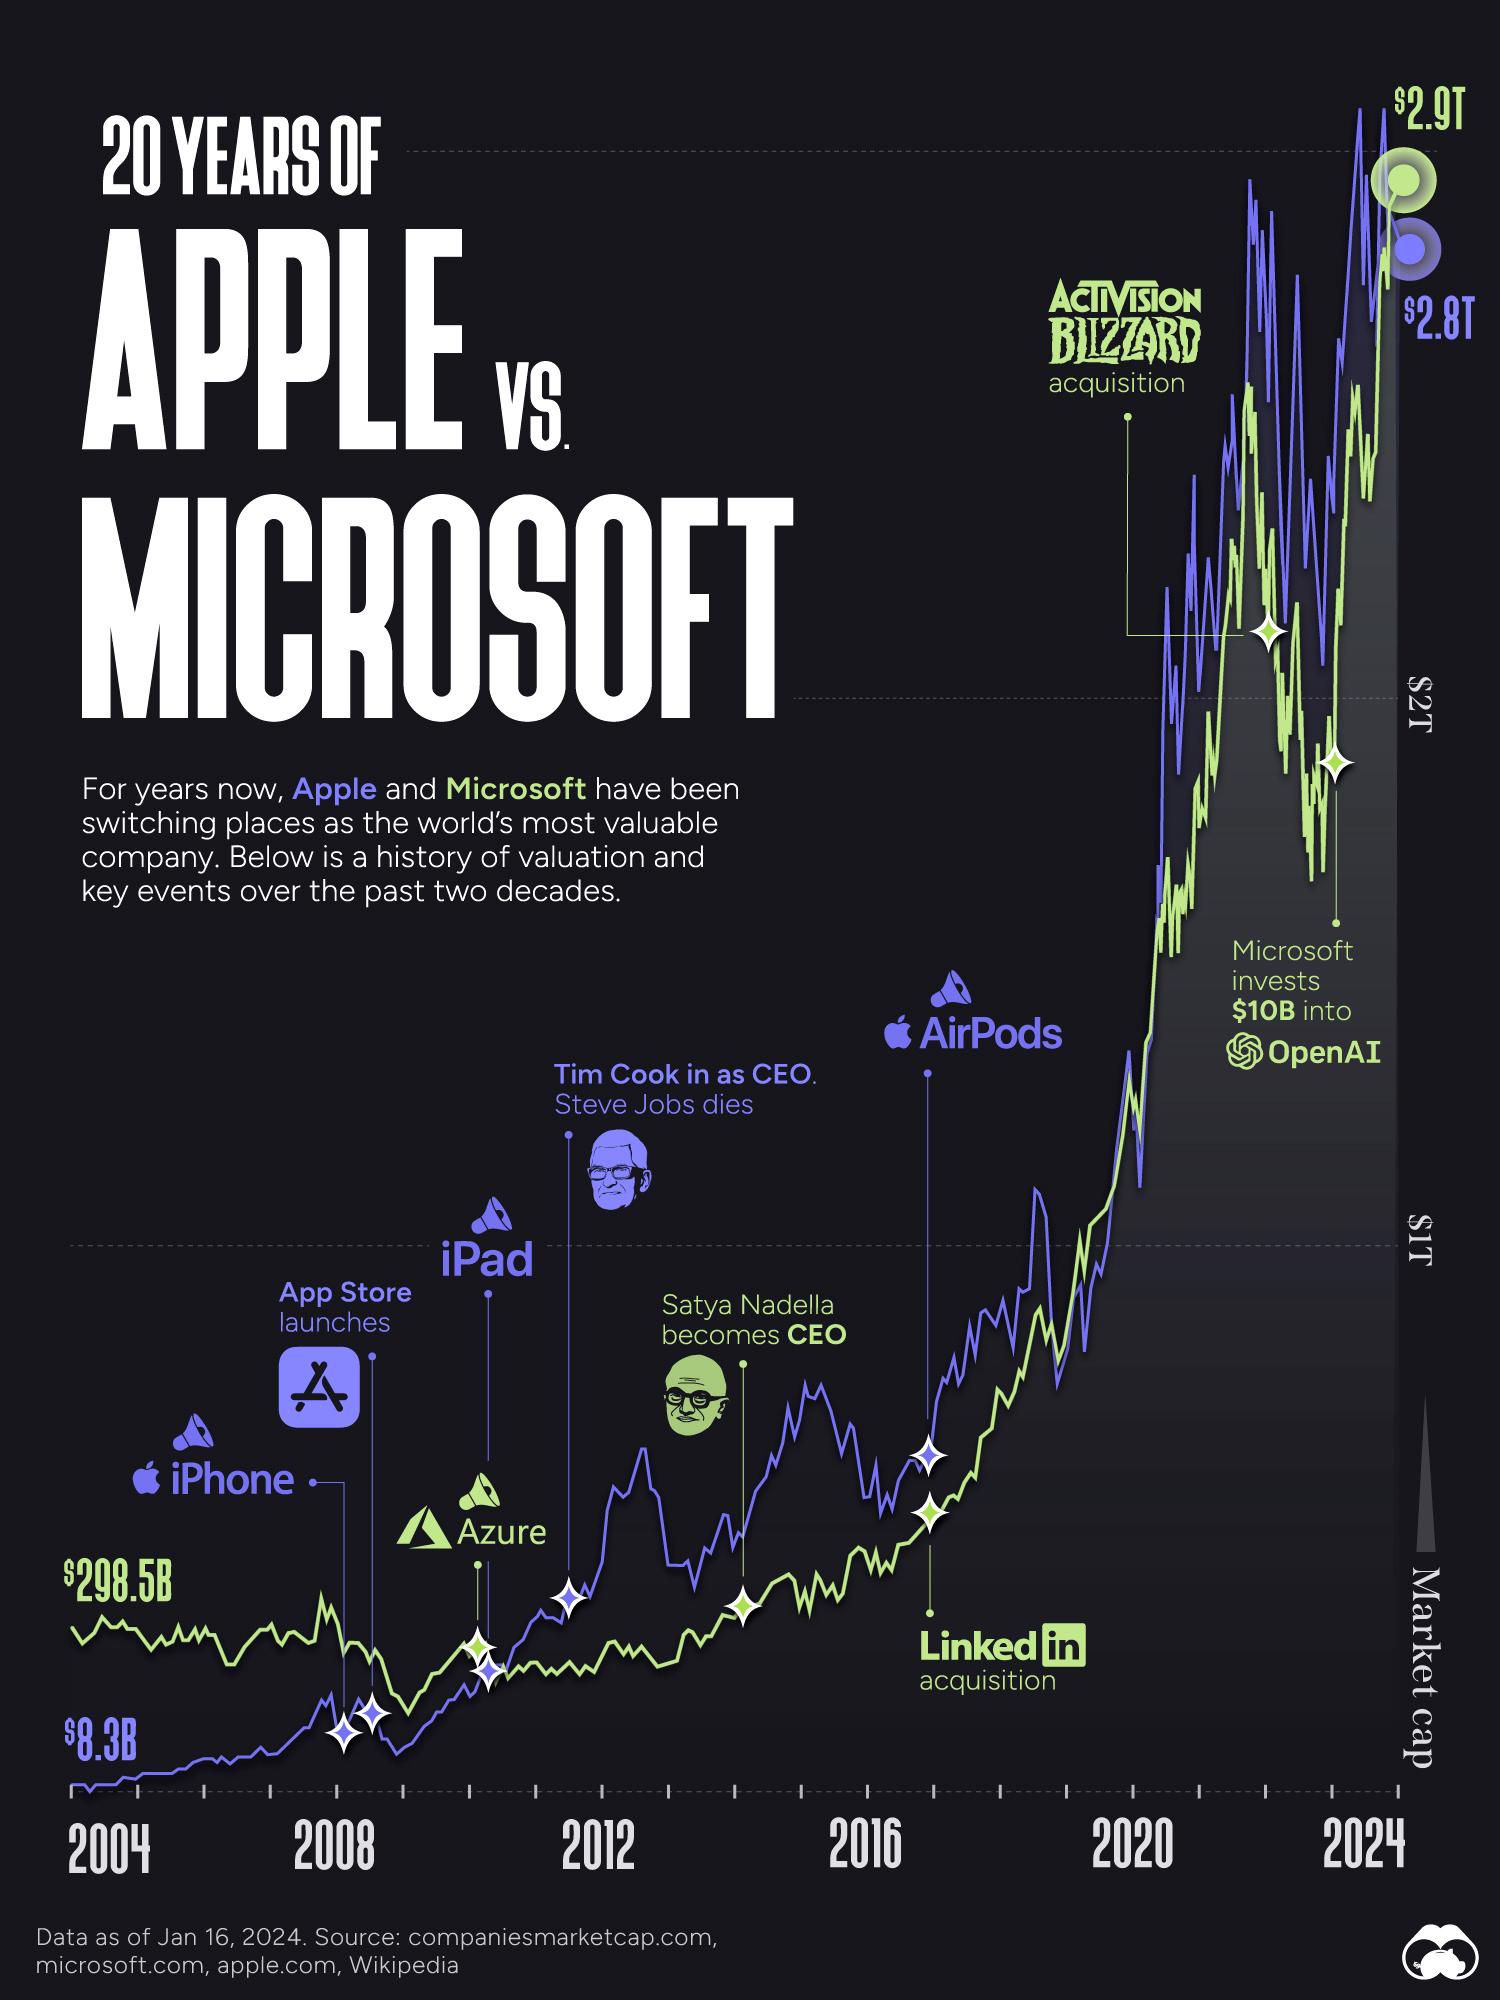 The Rivalry Continues: 20 Years of Apple vs Microsoft